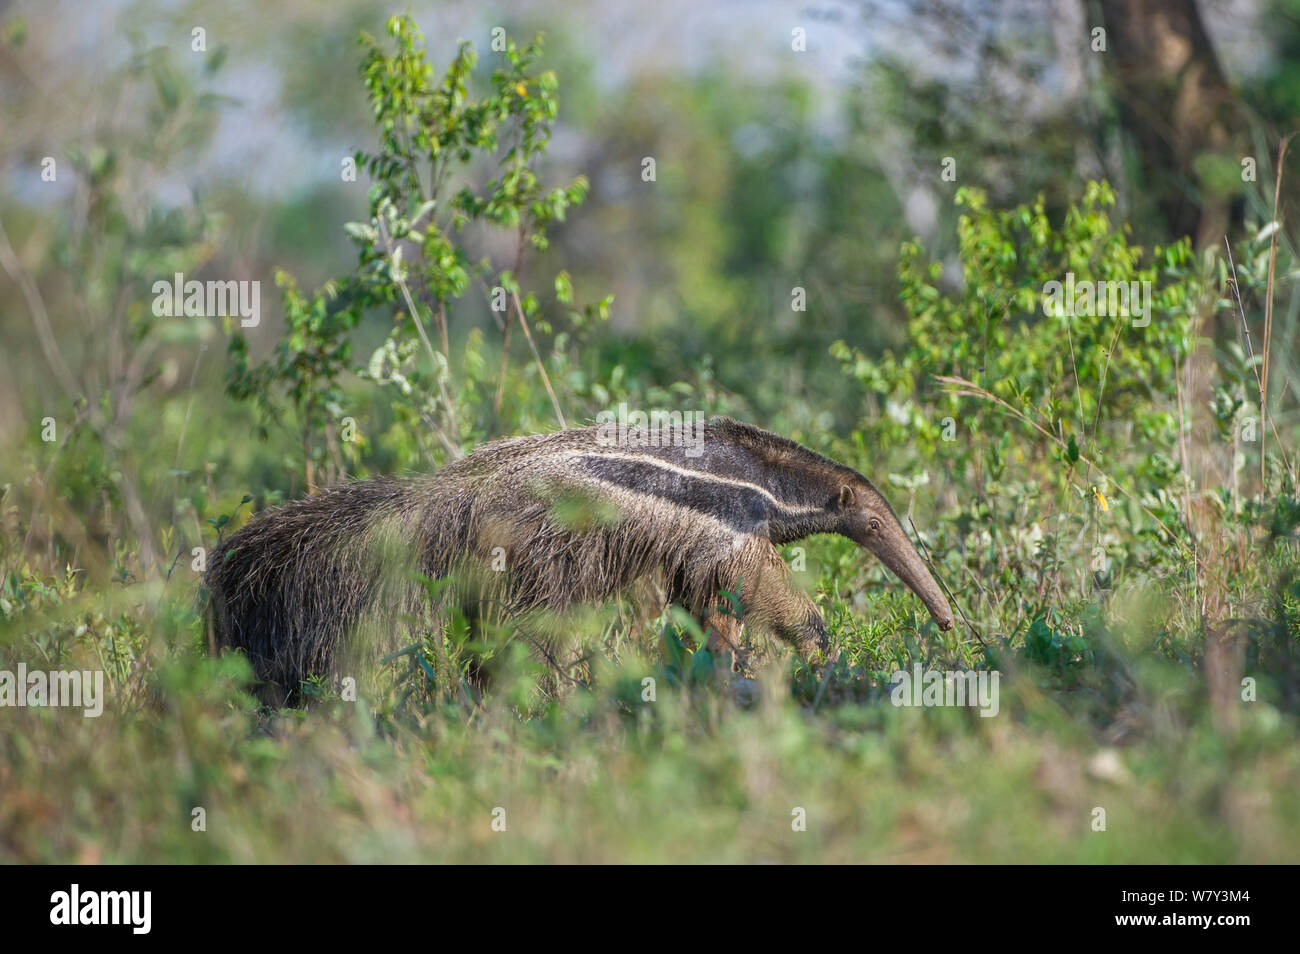 Adult Giant Anteater (Myrmecophaga tridactyla)  foraging, Northern Pantanal, Moto Grosso State, Brazil, South America. Stock Photo